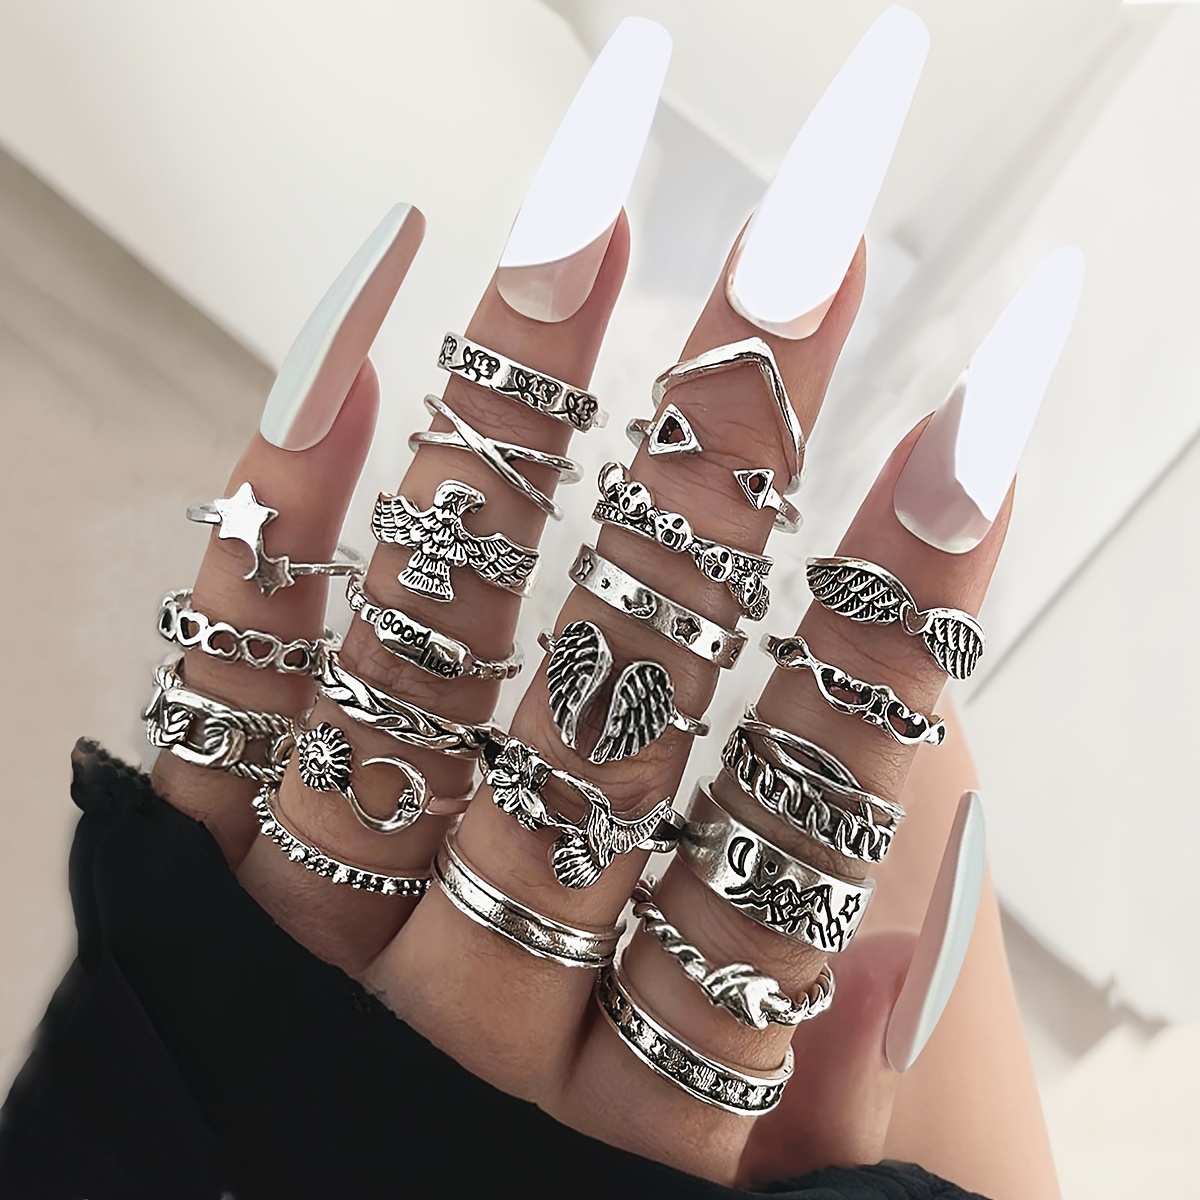 

23pc Vintage Style Eagle Skull Wings Mountain Etc Shape Joint Ring Set Gothic Zinc Alloy Finger Ring Jewelry Set For Women Party Gift